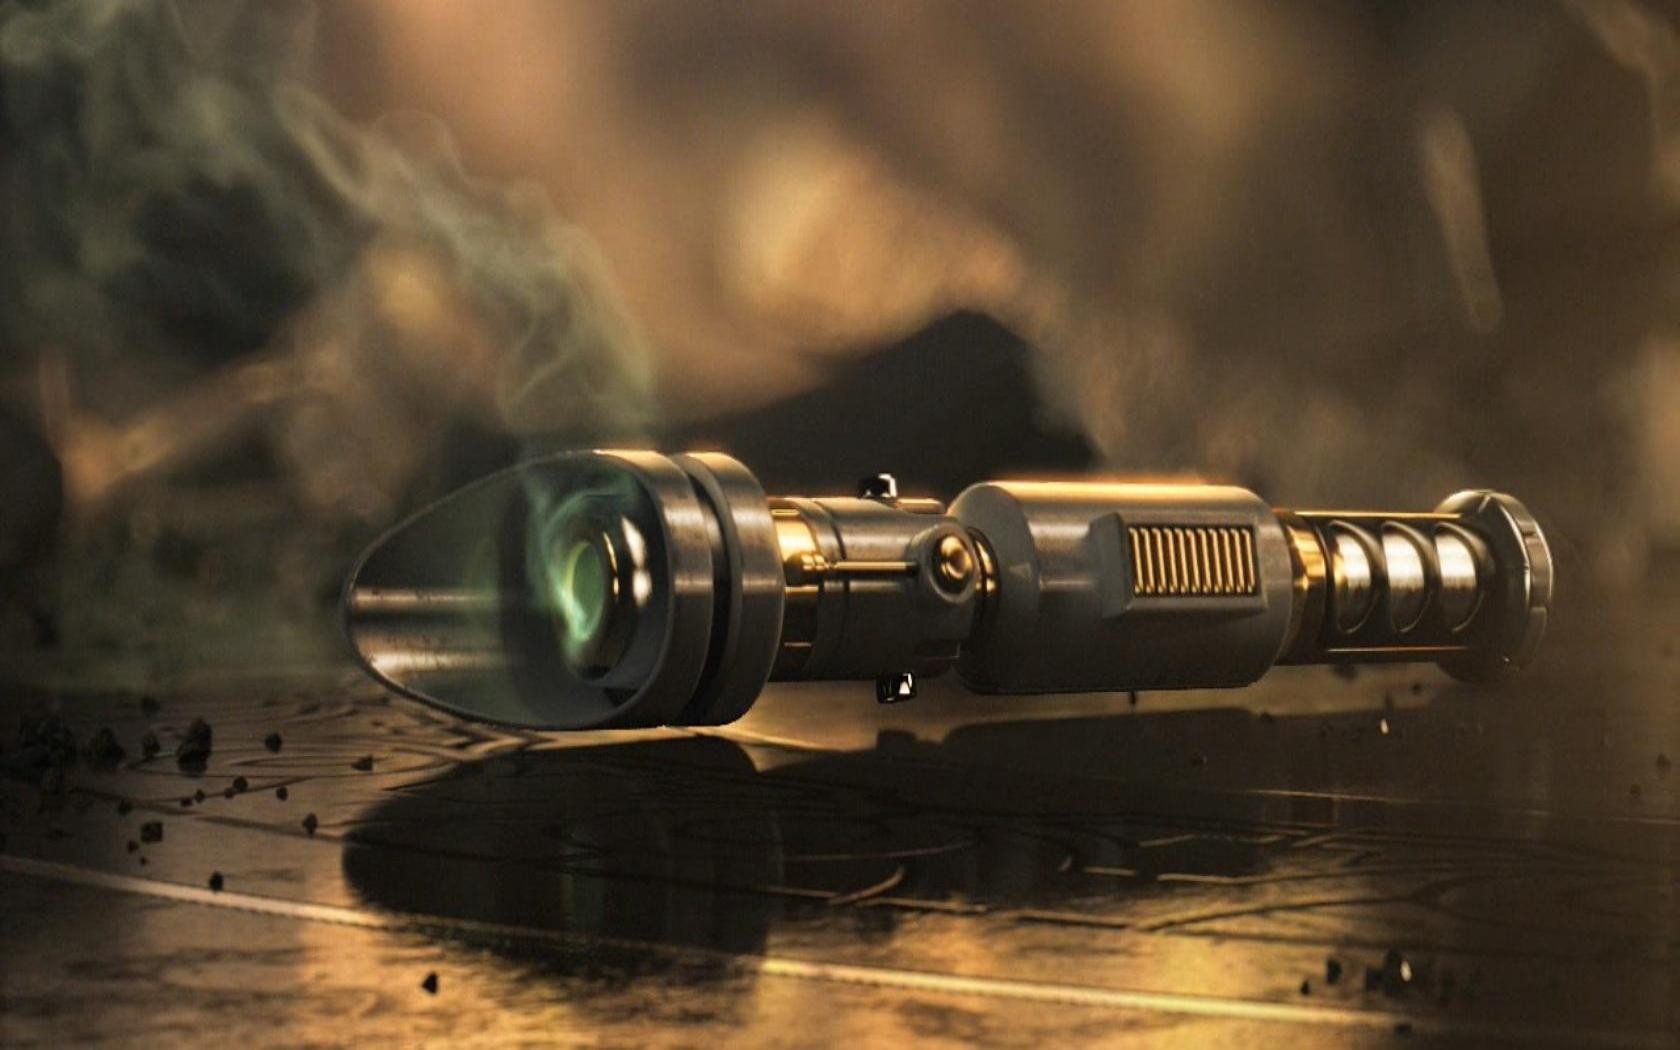 Free download real star wars lightsabers wallpaper free best hd wallpapers x for your desktop mobile tablet explore lightsaber wallpaper red lightsaber wallpaper hd lightsaber wallpaper purple lightsaber wallpaper